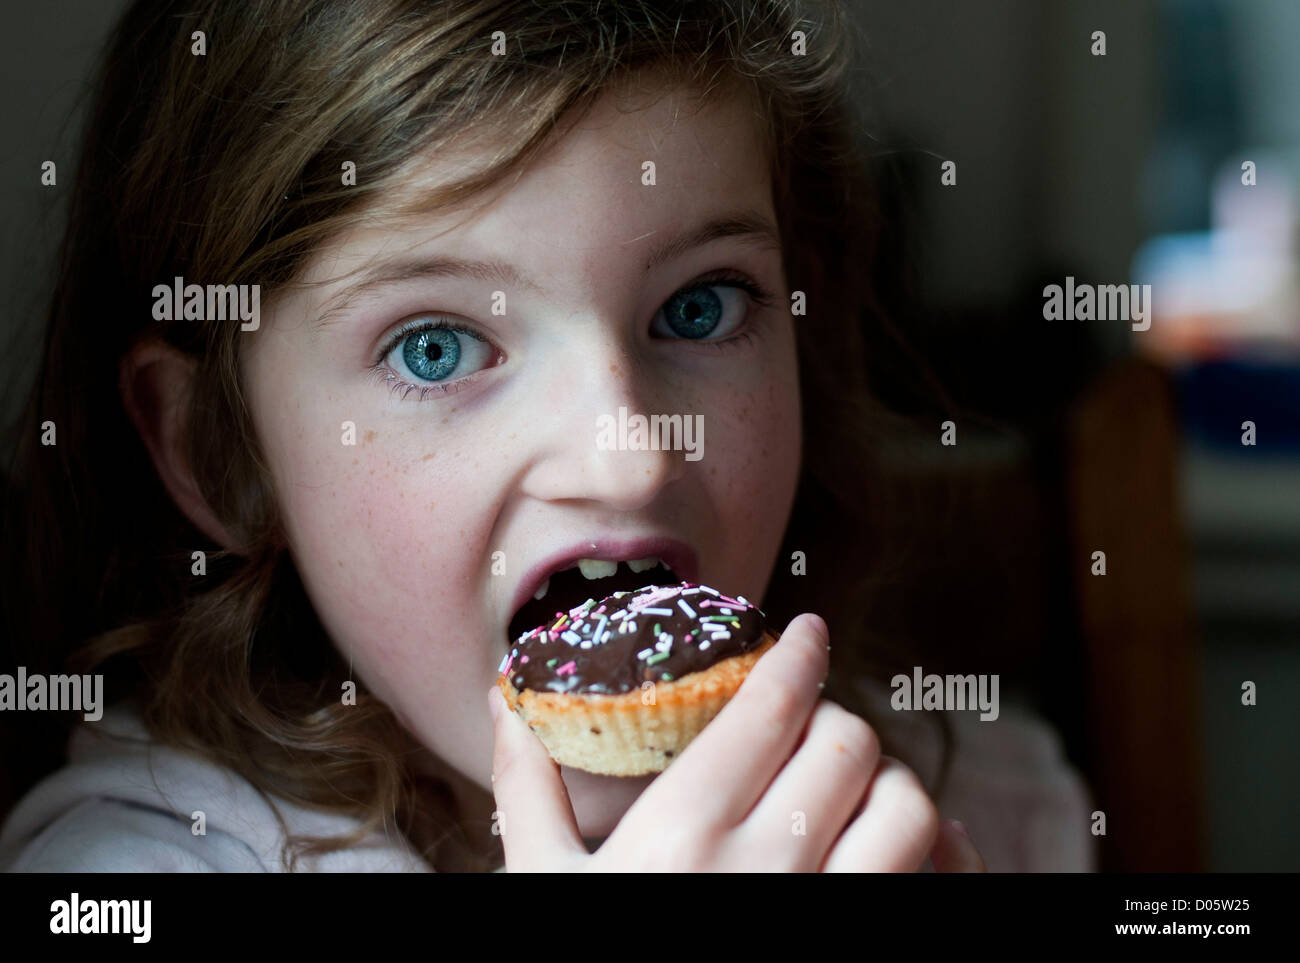 Blue eyed girl eating a chocolate covered cupcake. Stock Photo